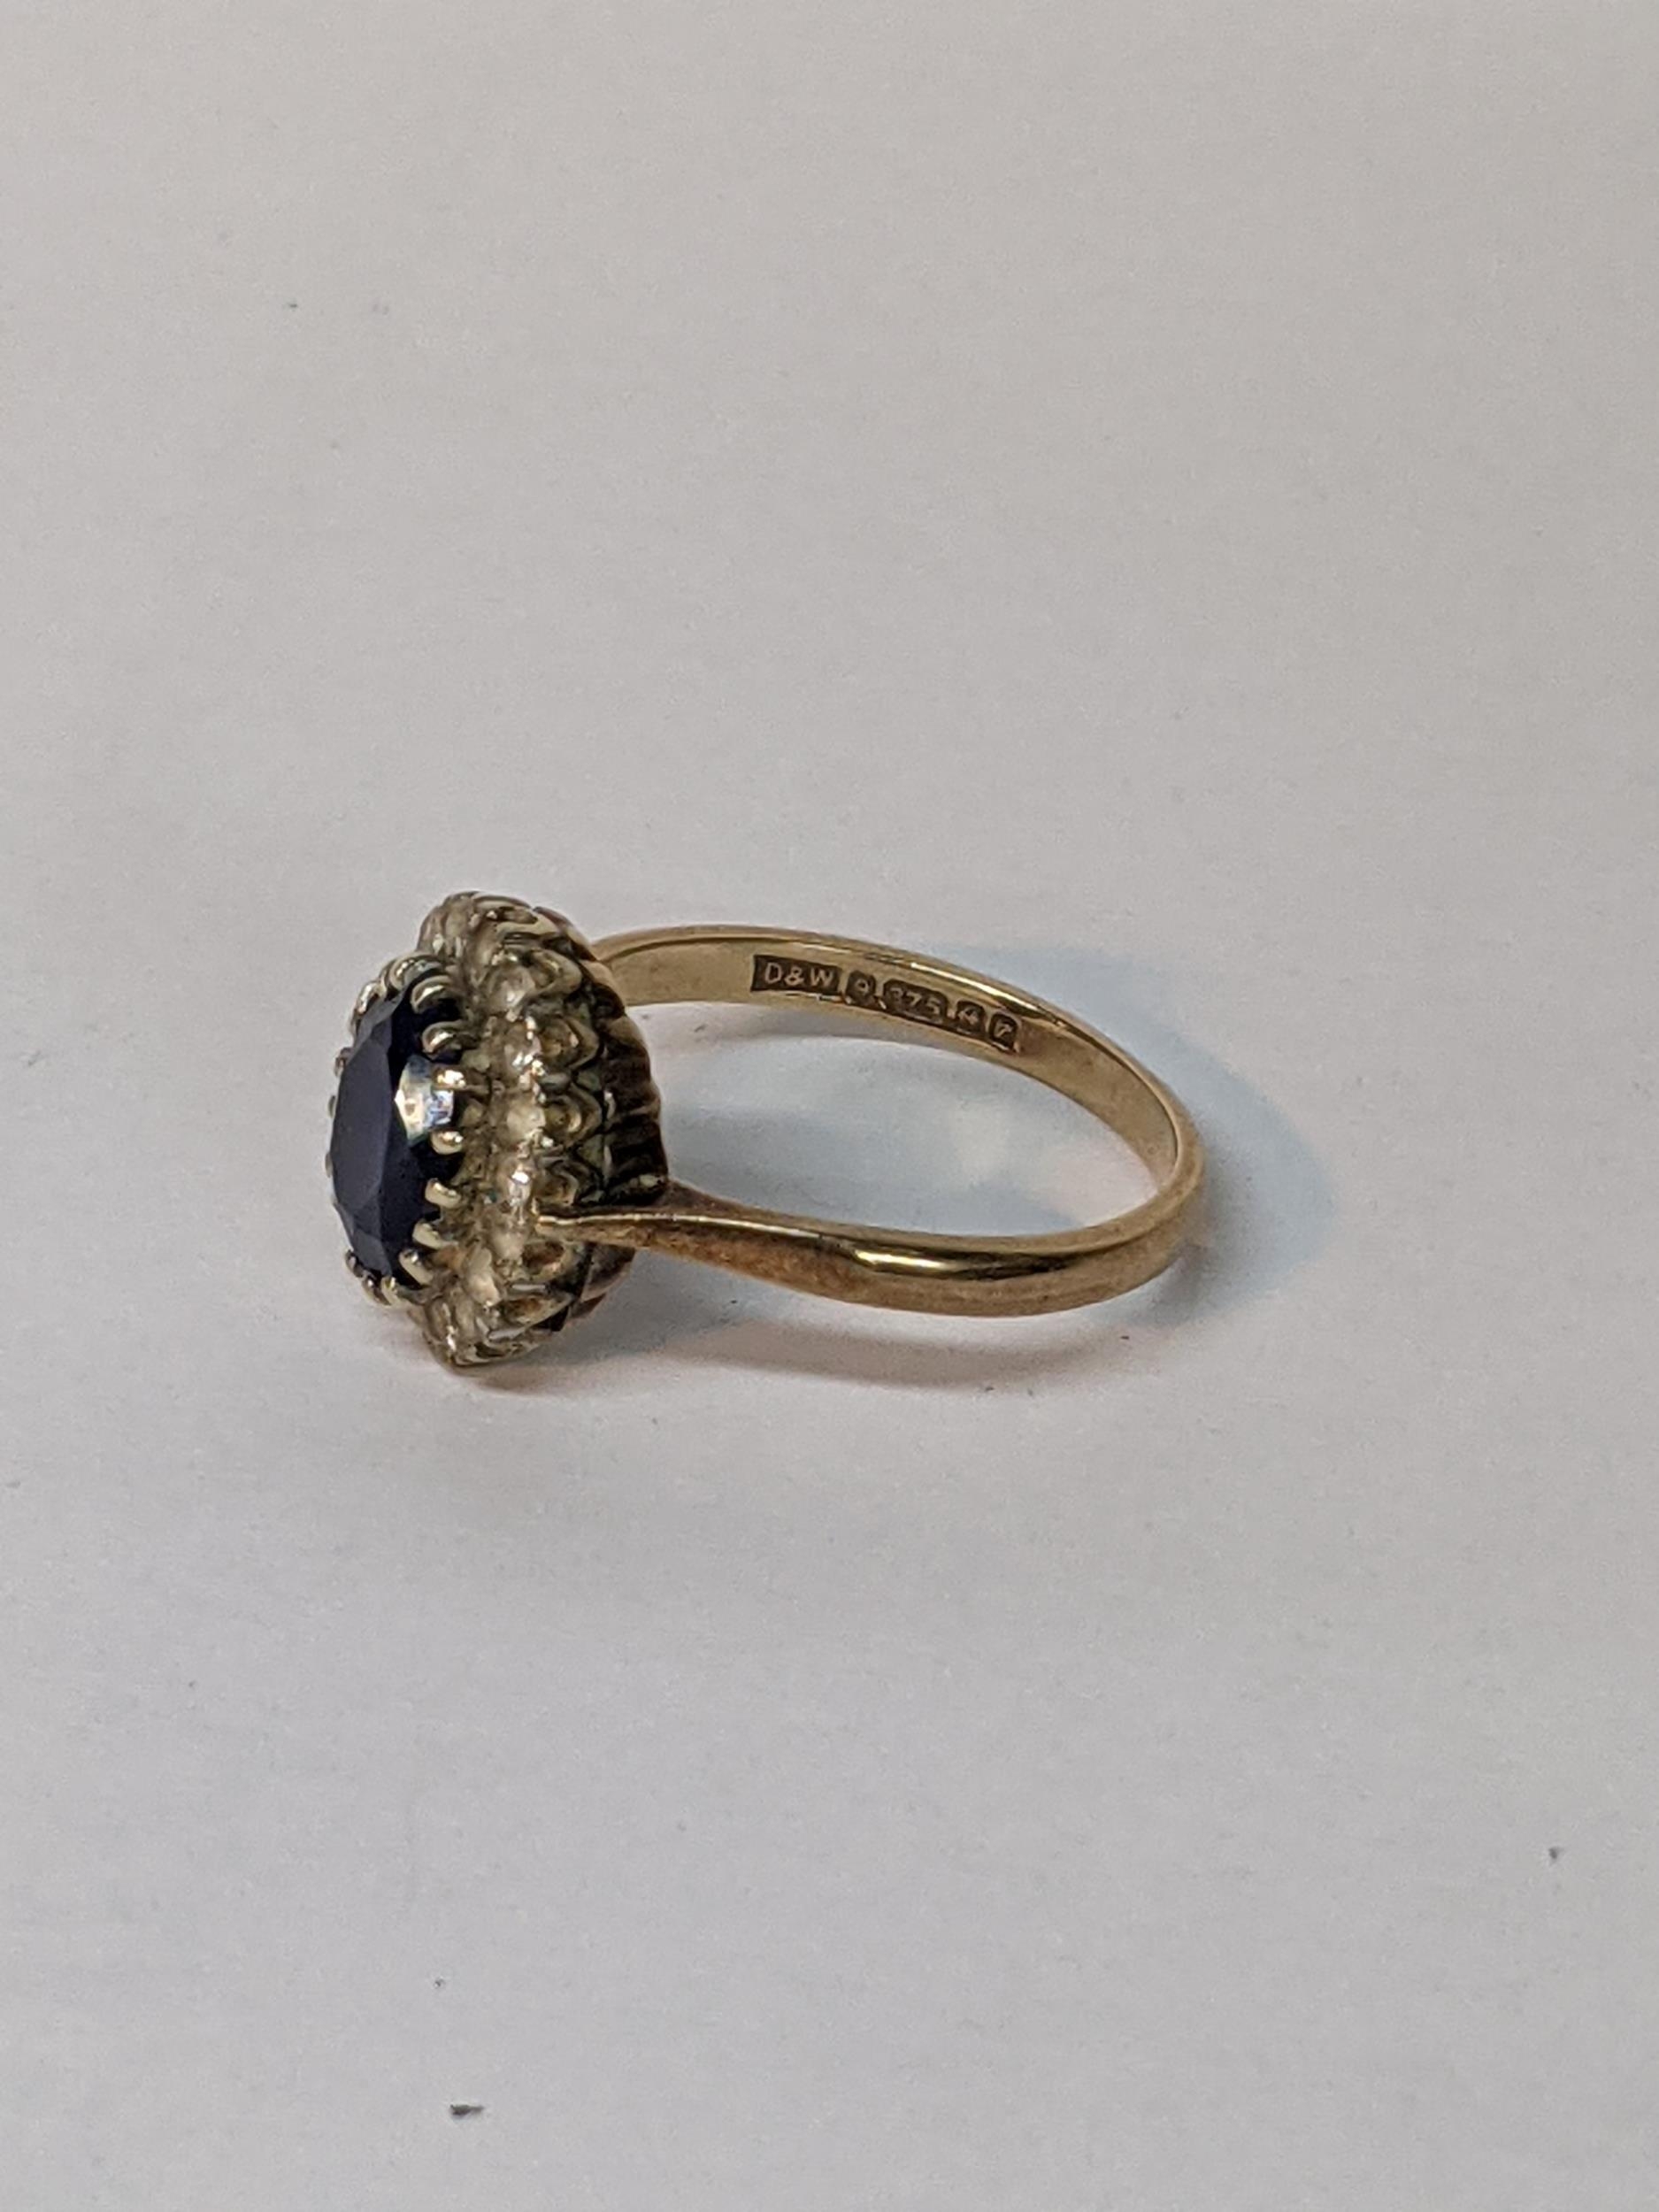 A 9ct rose gold ring set with an oval blue stone (possibly a heavily treated sapphire) surrounded by - Image 2 of 2